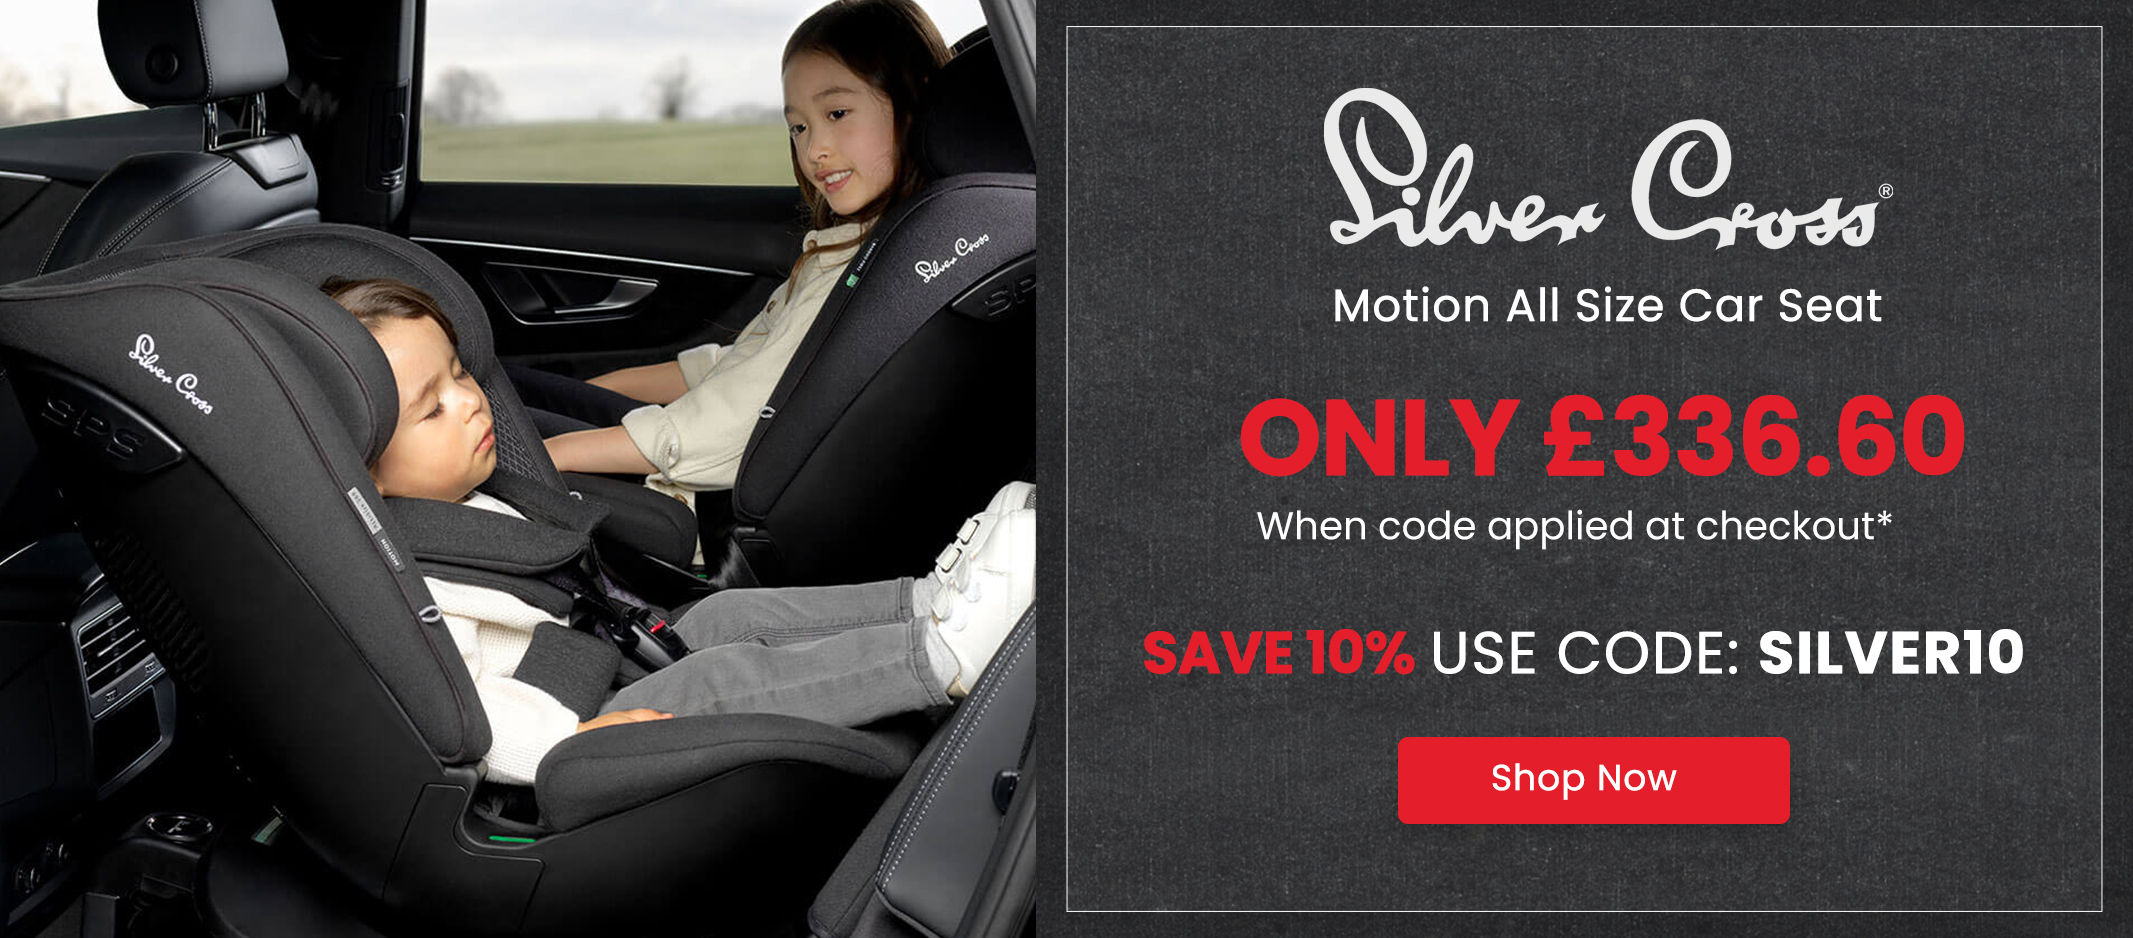 Motion All Size Car Seat